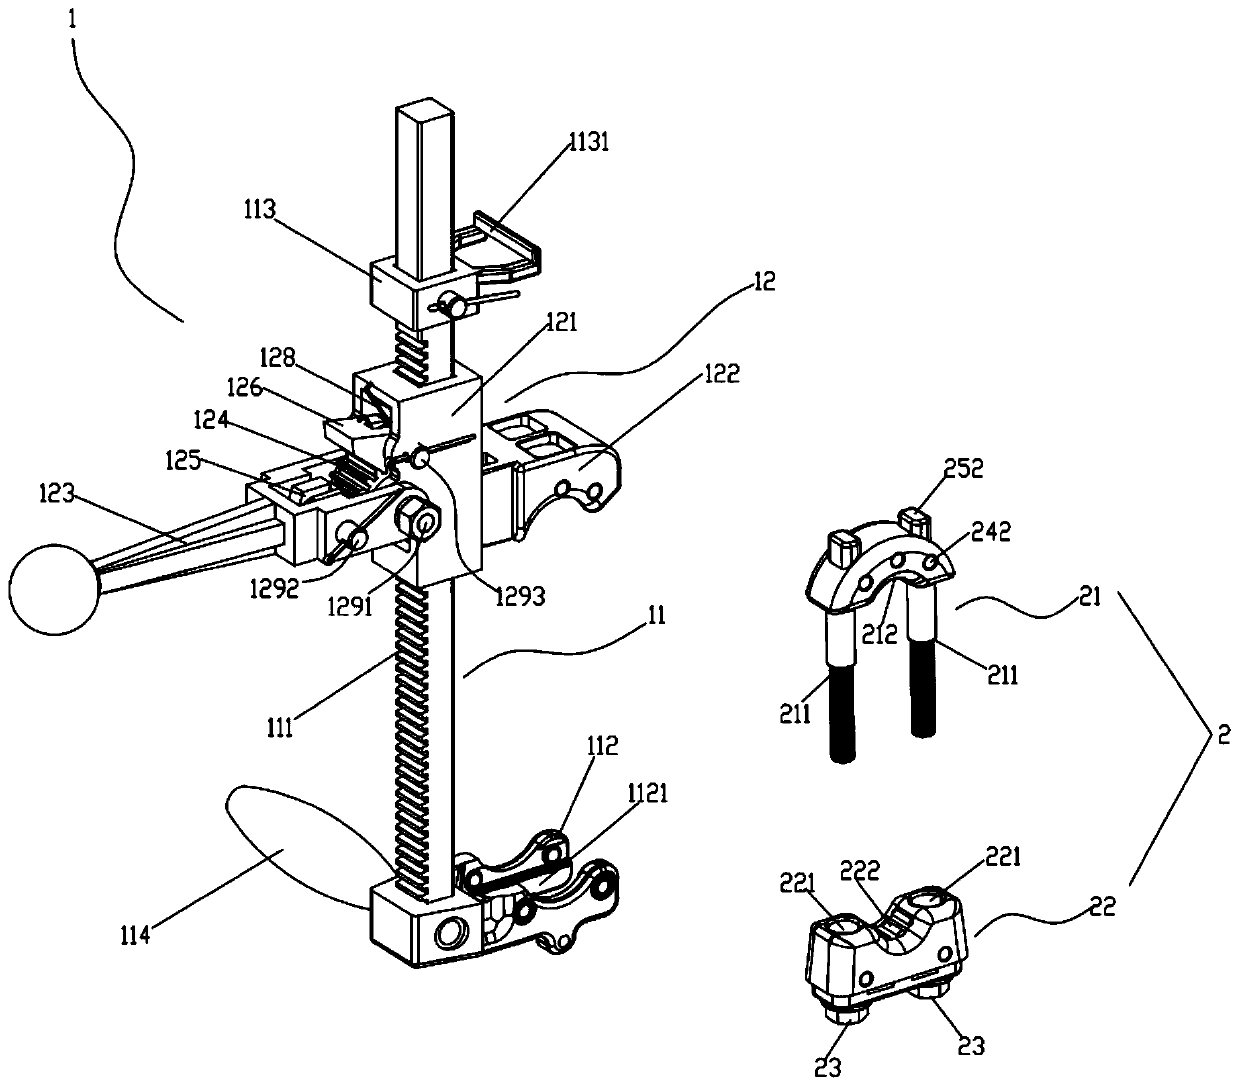 Hand-operated cable terminal turn-back binding device